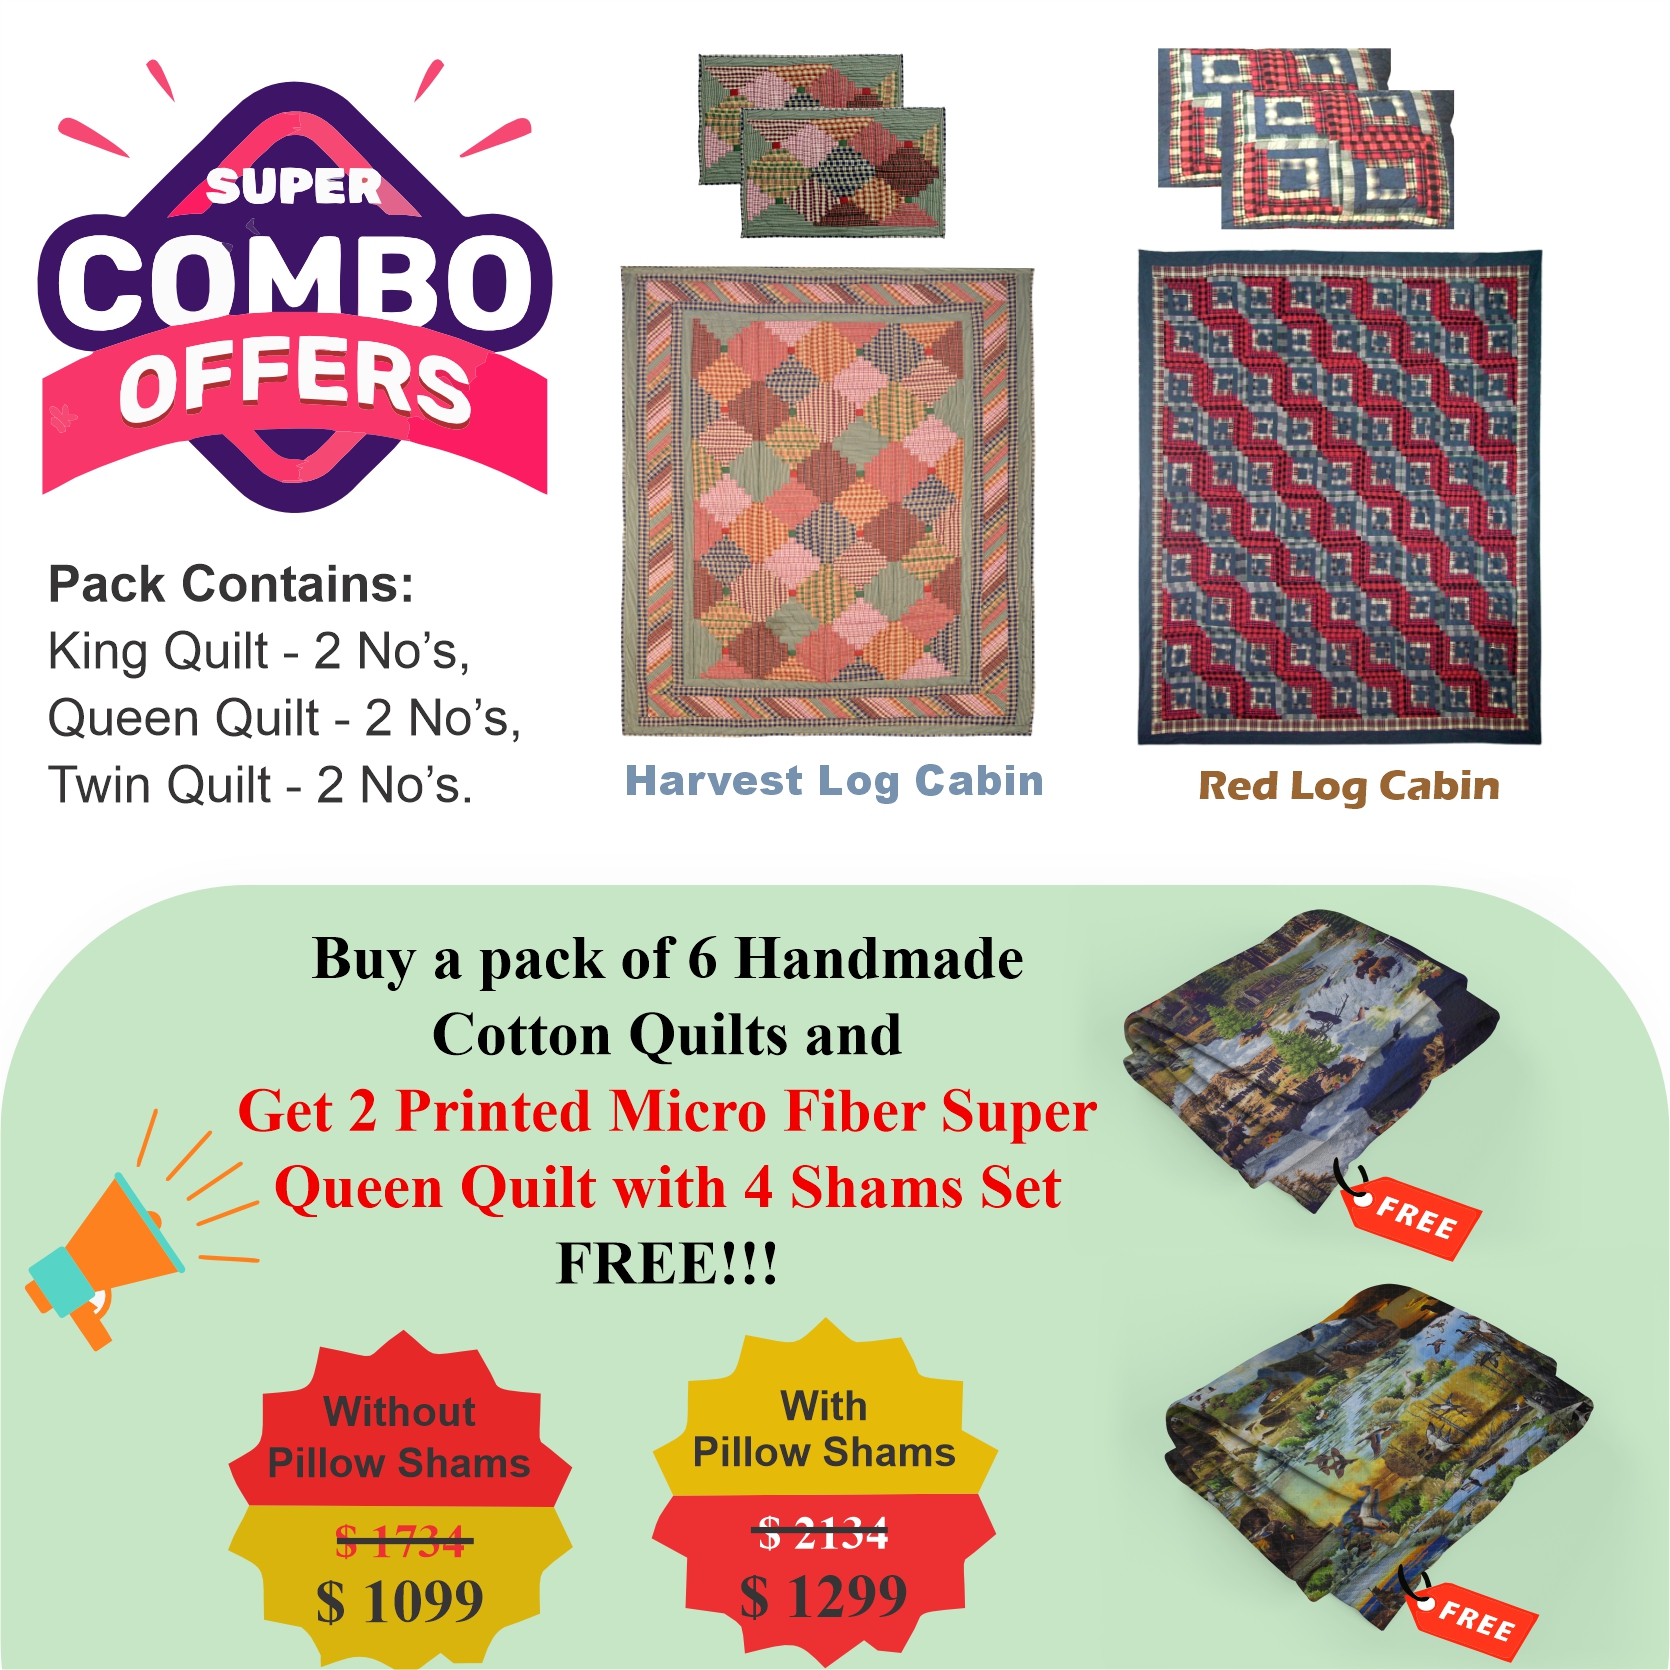 Harvest Log Cabin/Red Log Cabin  - Pack of 6 handmade cotton quilts | Buy 6 cotton quilts and get 2 Printed Microfiber Super Queen Quilt with 4 Shams